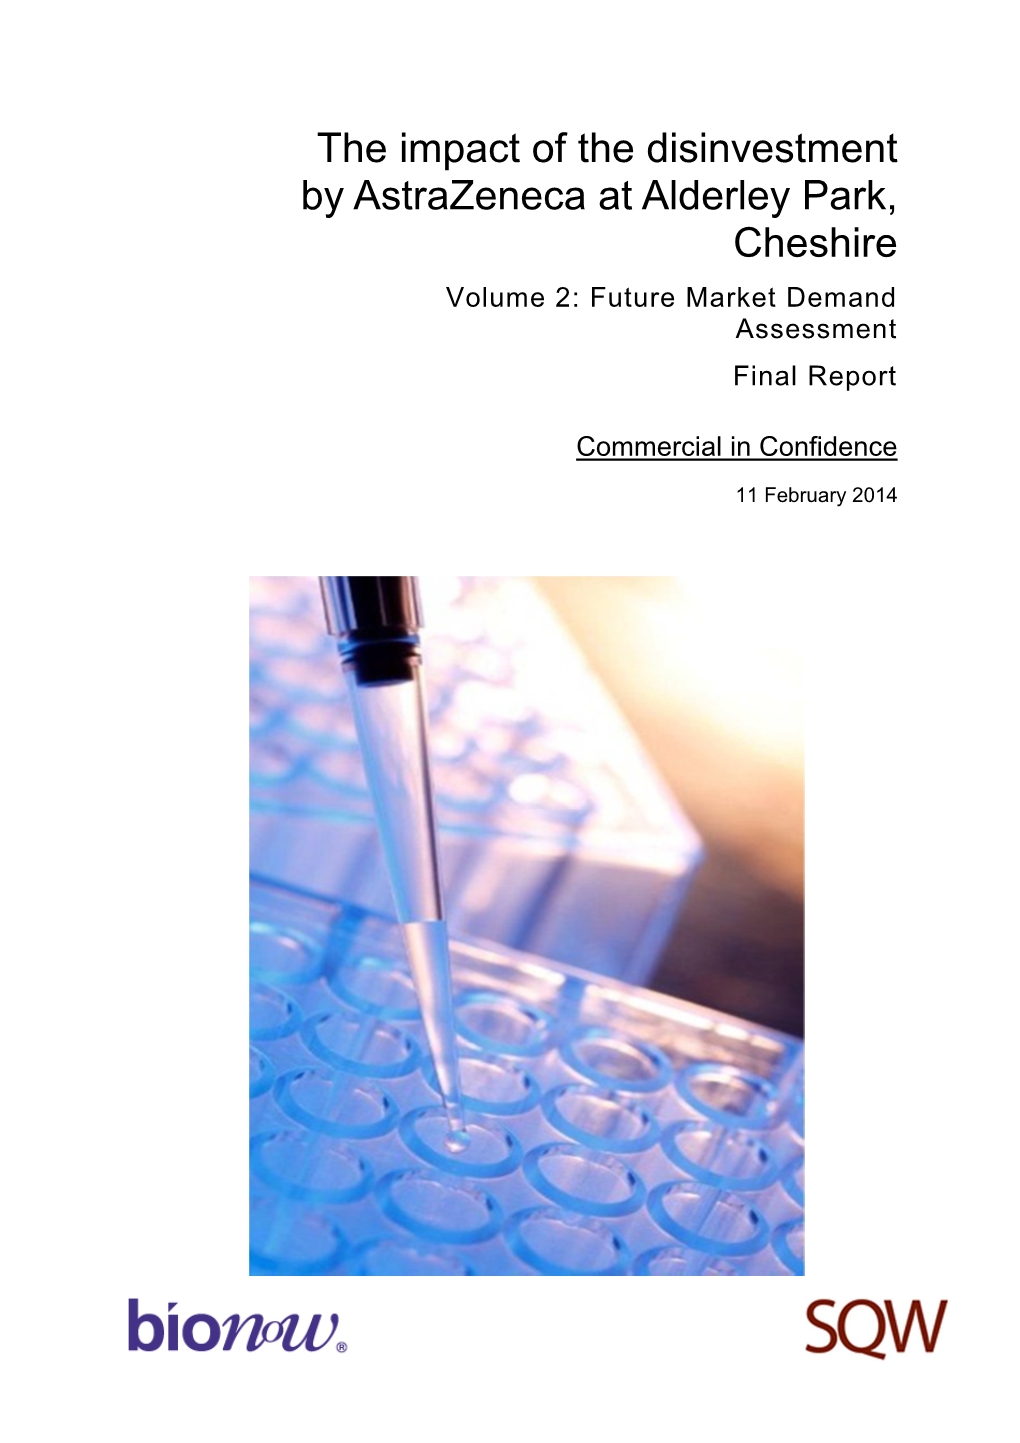 The Impact of the Disinvestment by Astrazeneca at Alderley Park, Cheshire Final Report Contents